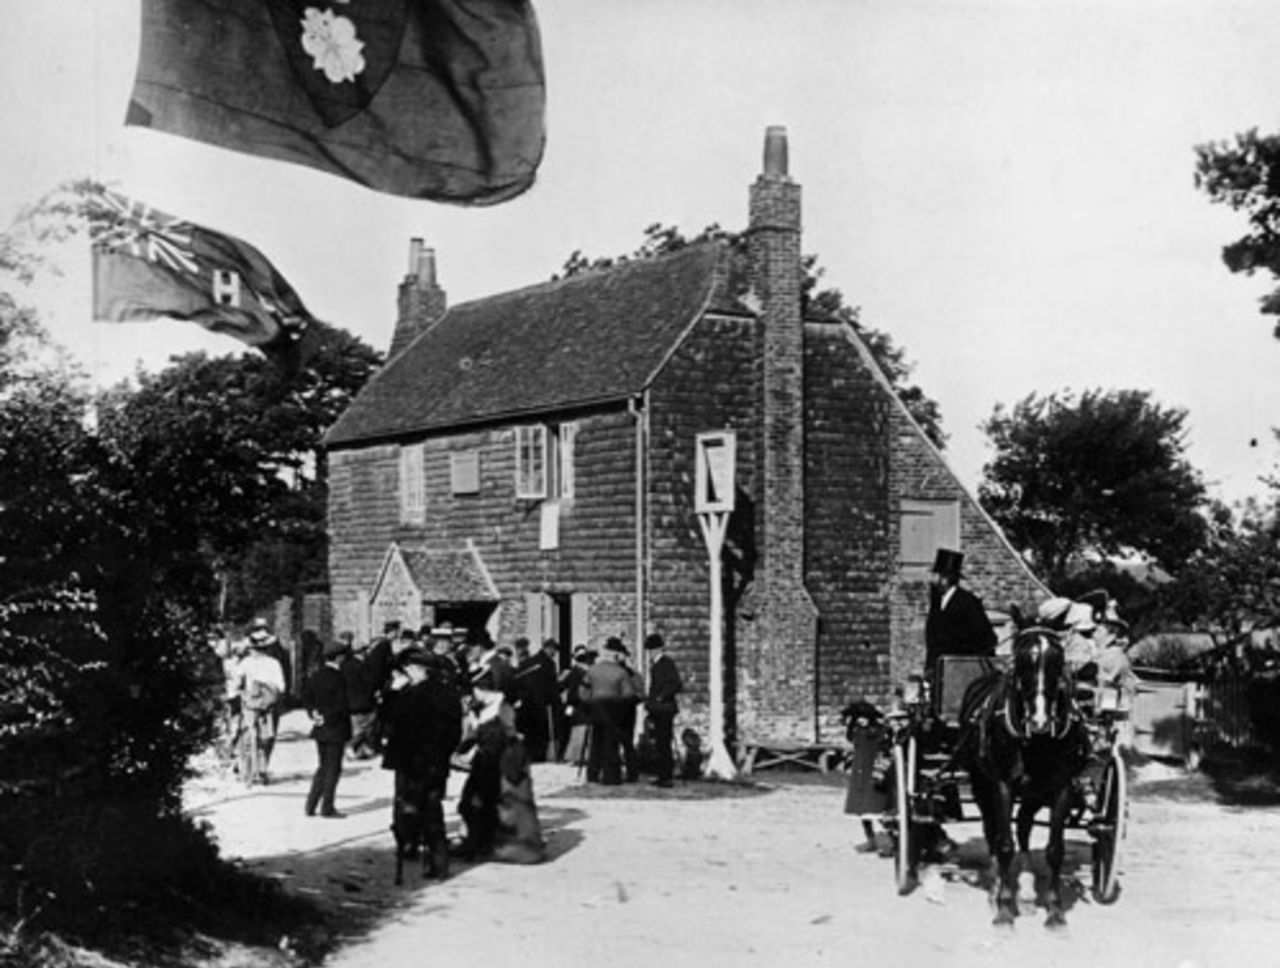 The Bat and Ball Inn in Hampshire which was frequented by the Hambledon Cricket Club, September 9, 1908